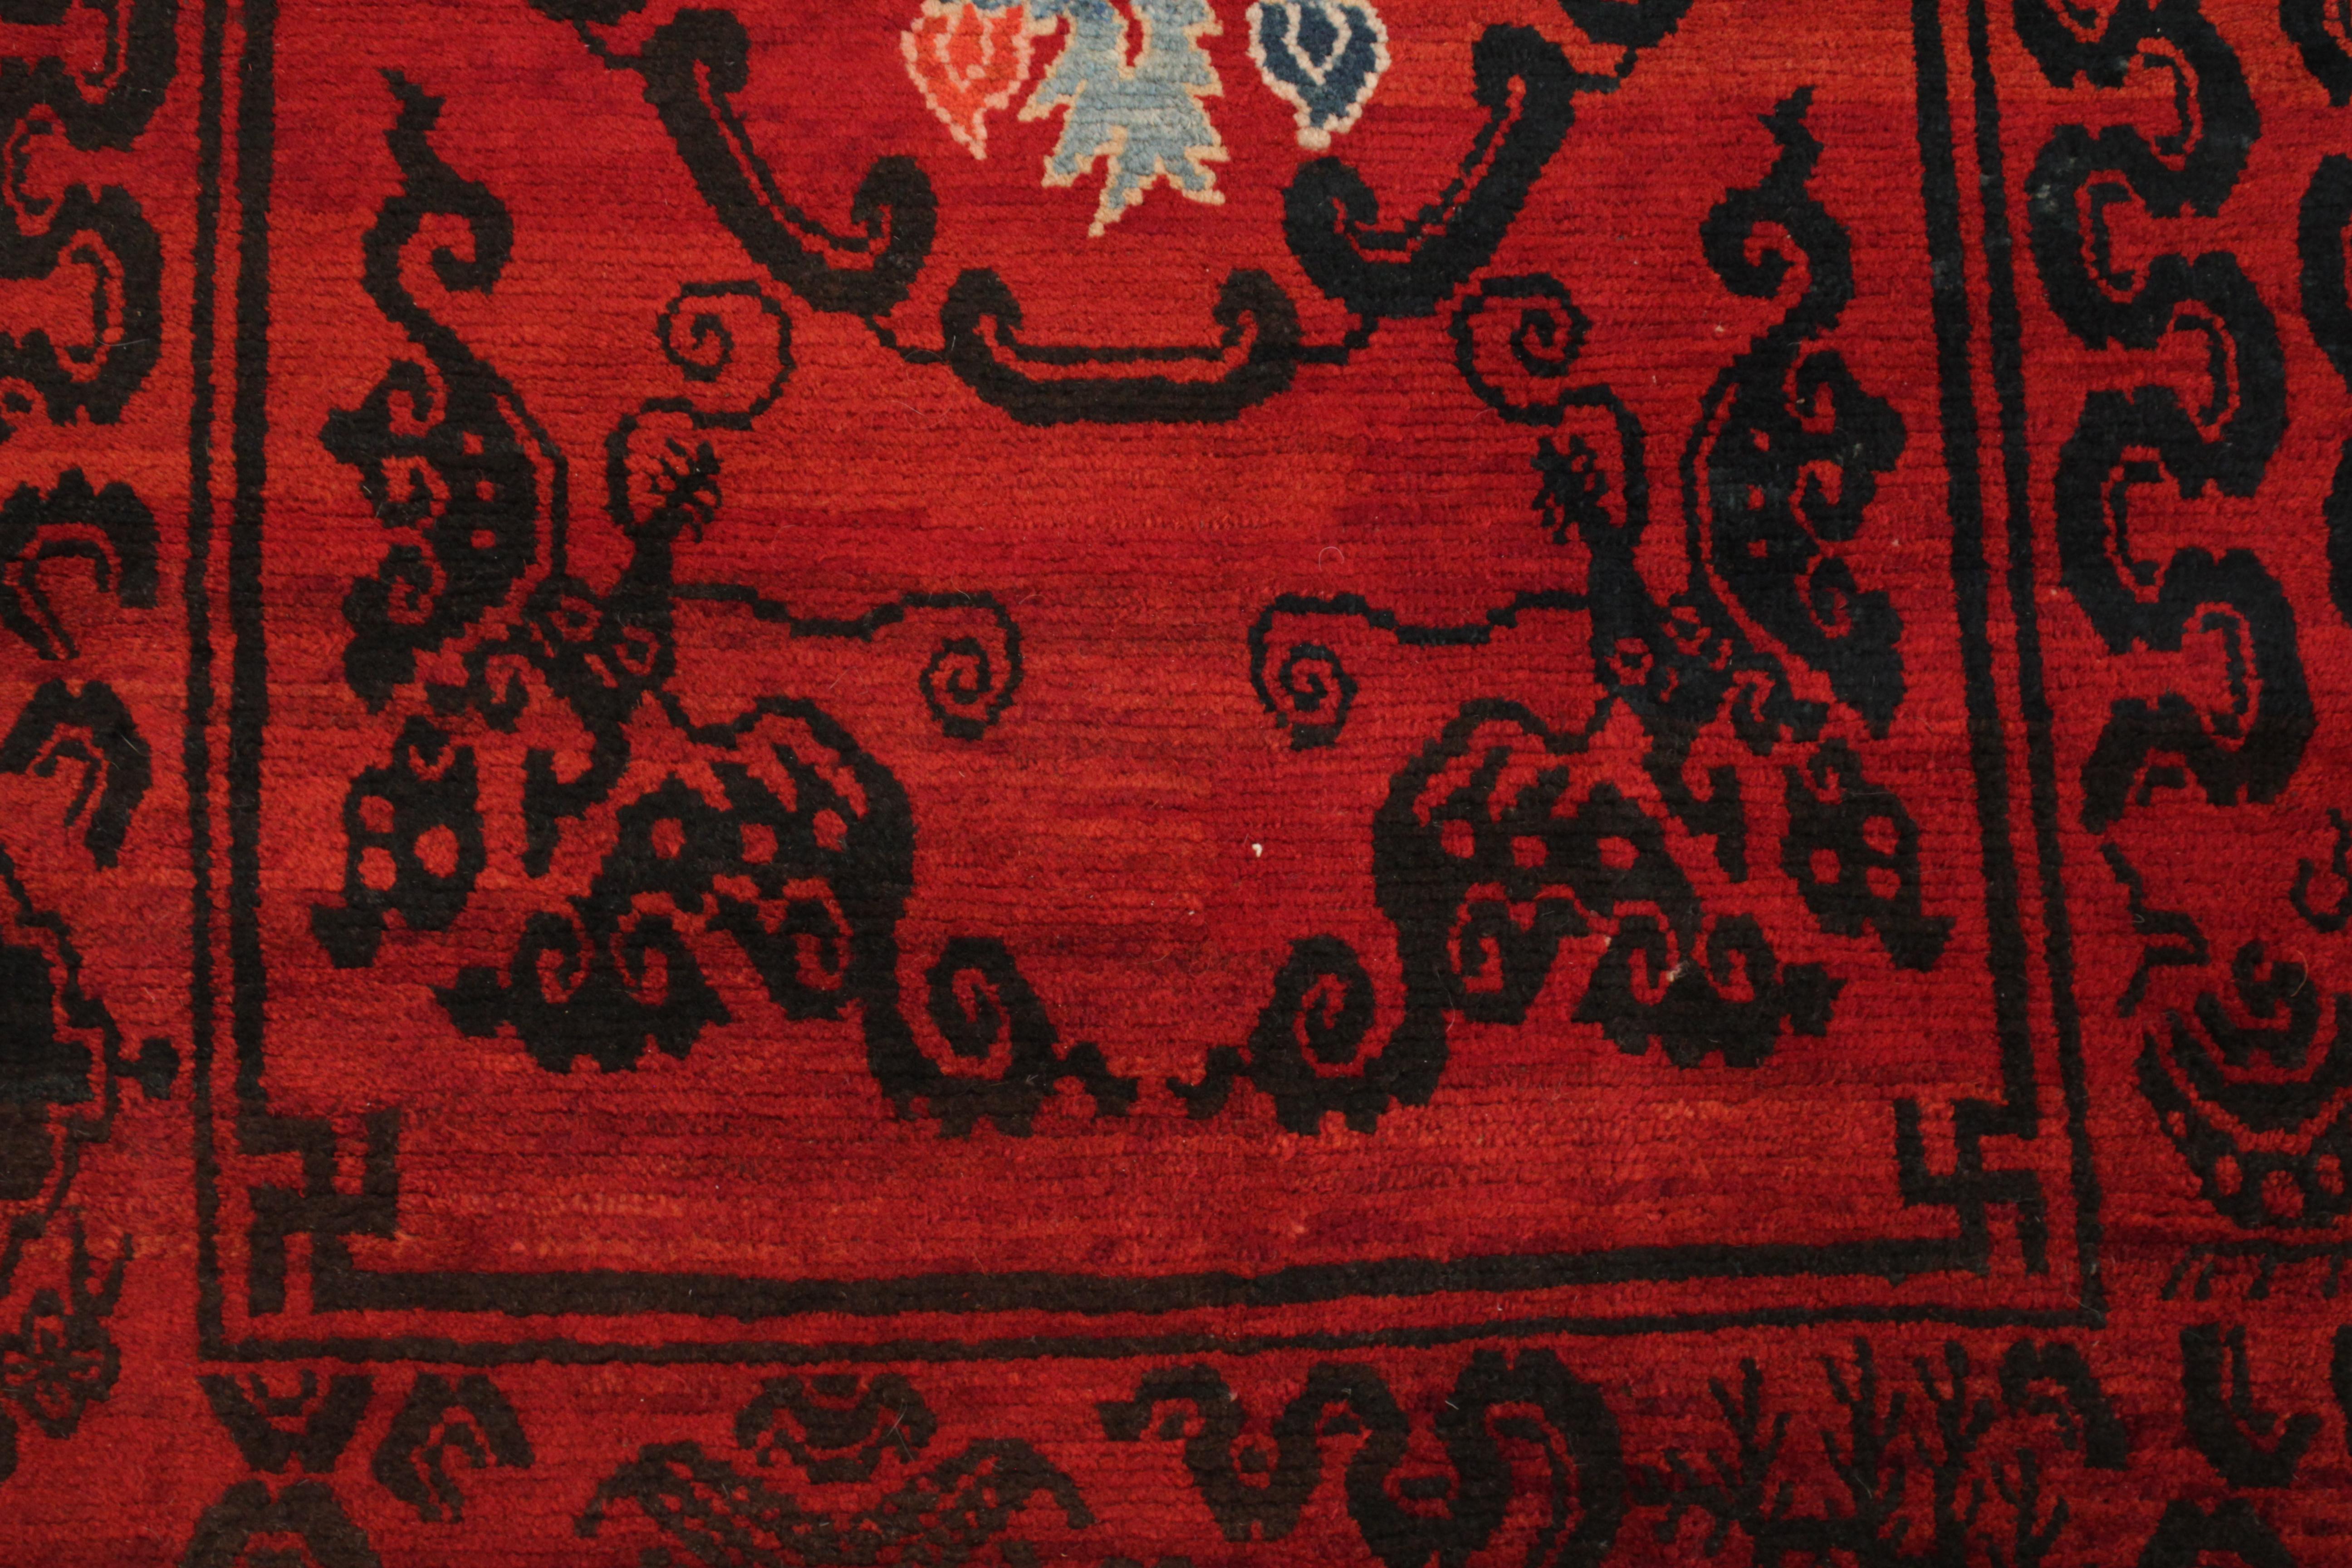 A rare Tibetan meditation rug with a lacquer red background, embellished in black and showing two bracketed roundels each containing a stylisation of the lotus flower, symbol of purity, flanked in the corners by stylised butterflies and framed by a